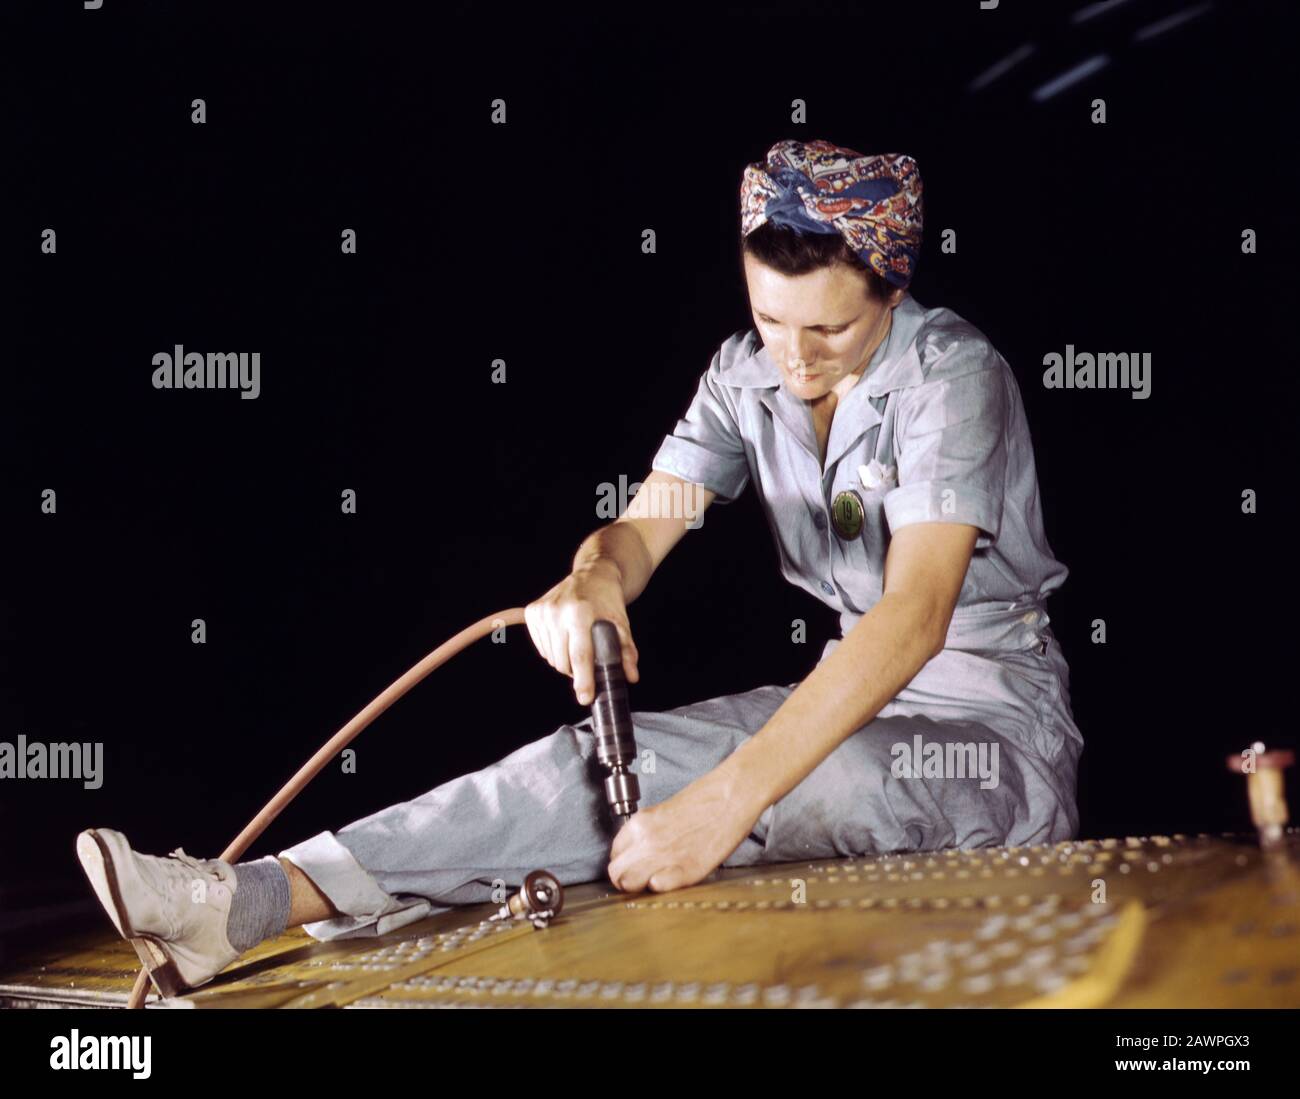 War Production Worker Drilling on a Liberator Bomber, Consolidated Aircraft Corp., Fort Worth, Texas, USA, fotografia di Howard R. Hollem, U.S. Office of War Information, ottobre 1942 Foto Stock